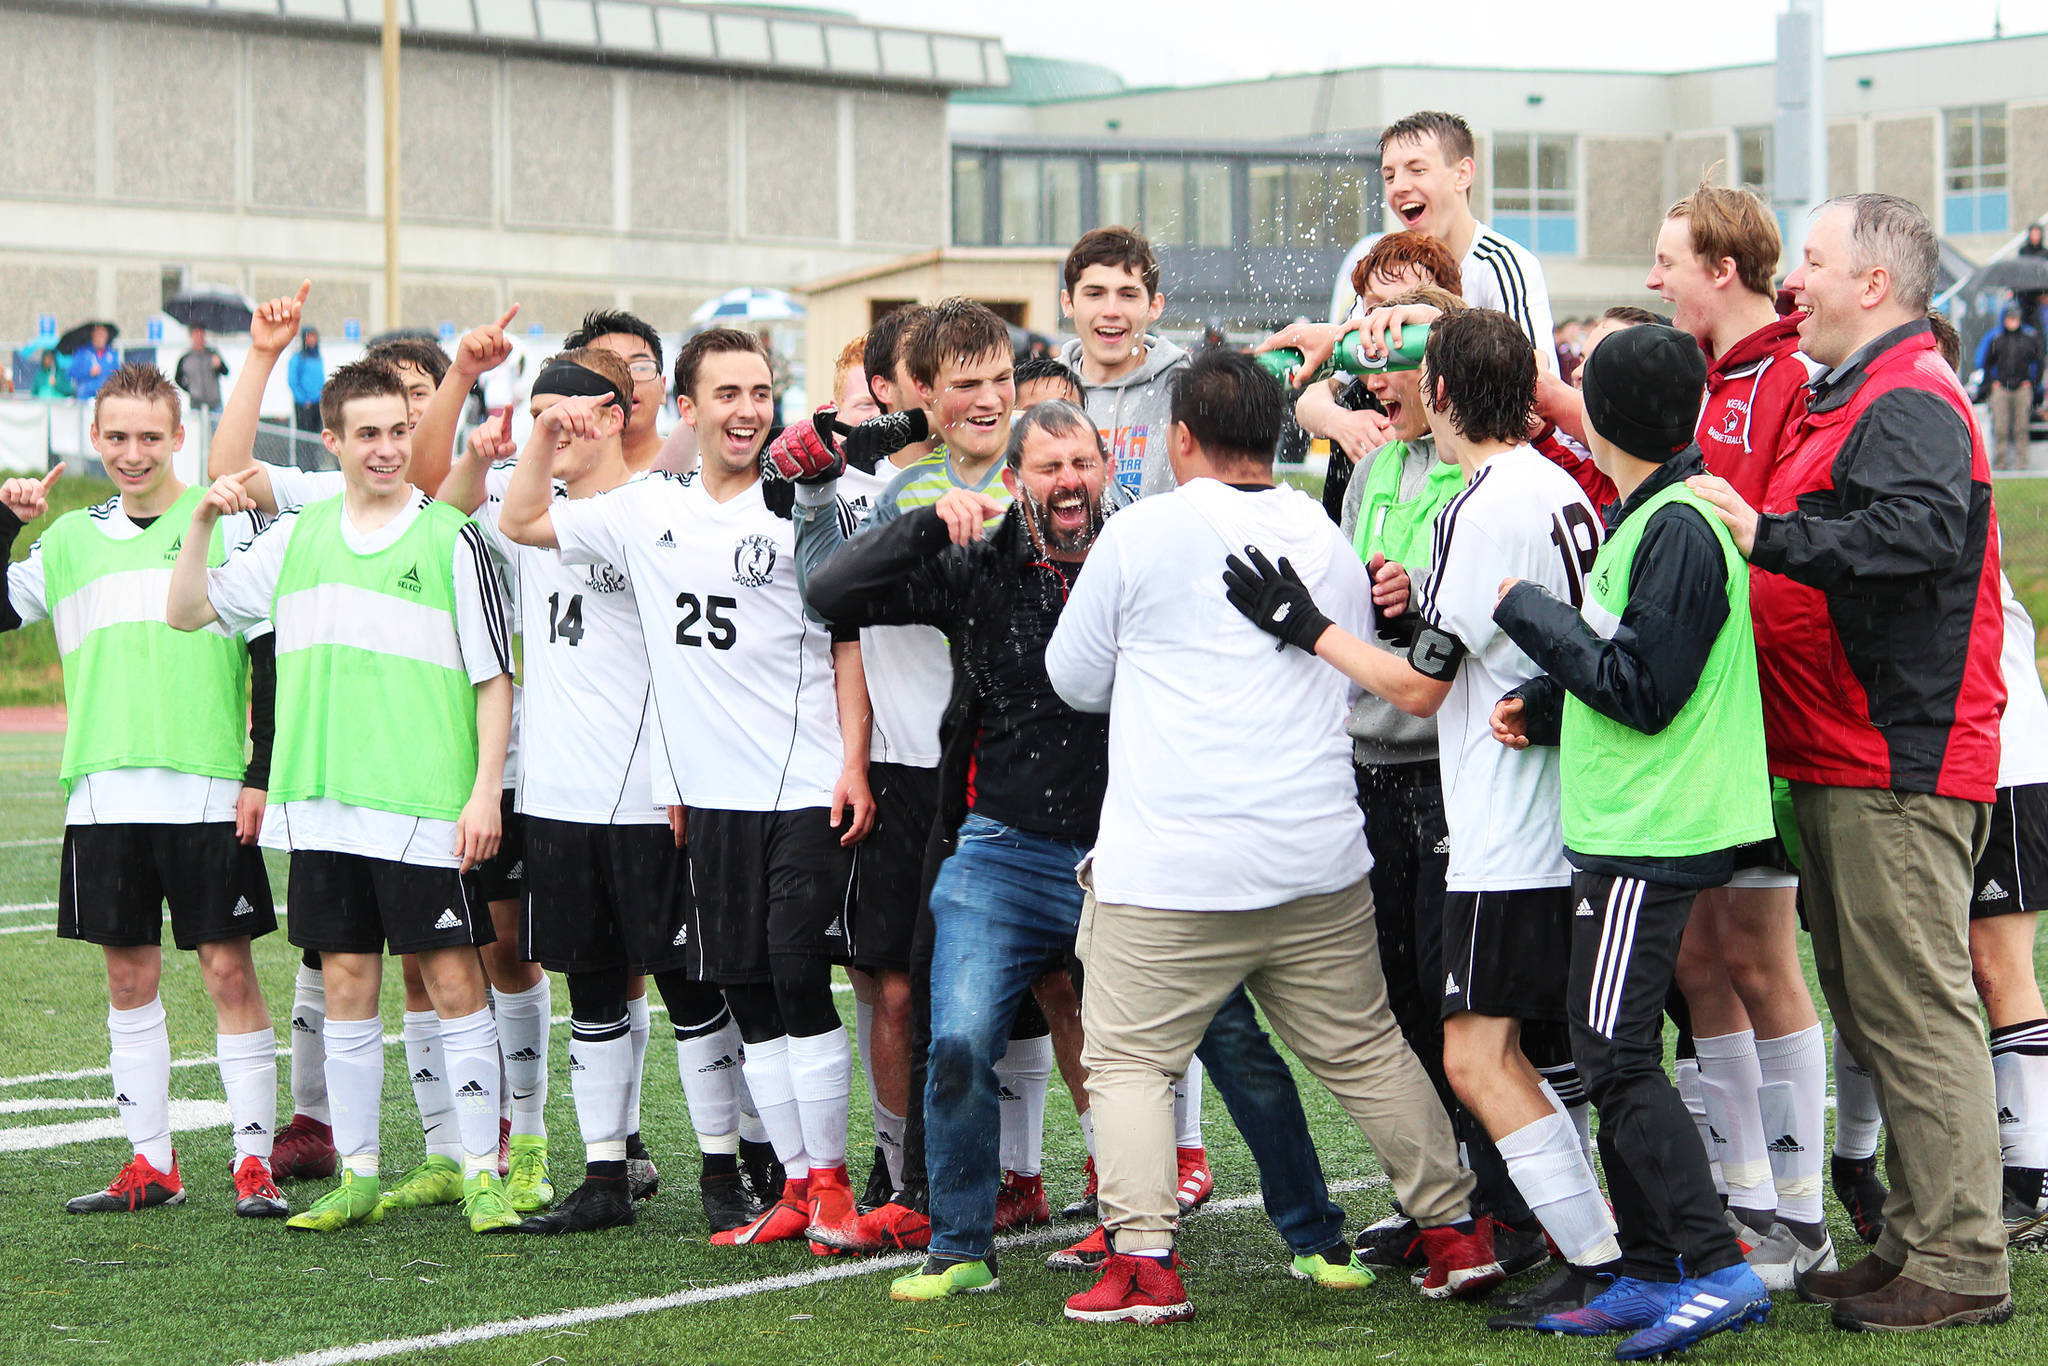 Members of the Kenai boys soccer team dump water on their head coach, Shane Lopez, in celebration of their win over Juneau on May 25 to claim the Division II state soccer championship title. The game was played at Service High School in Anchorage. (Photo by Megan Pacer/Homer News)